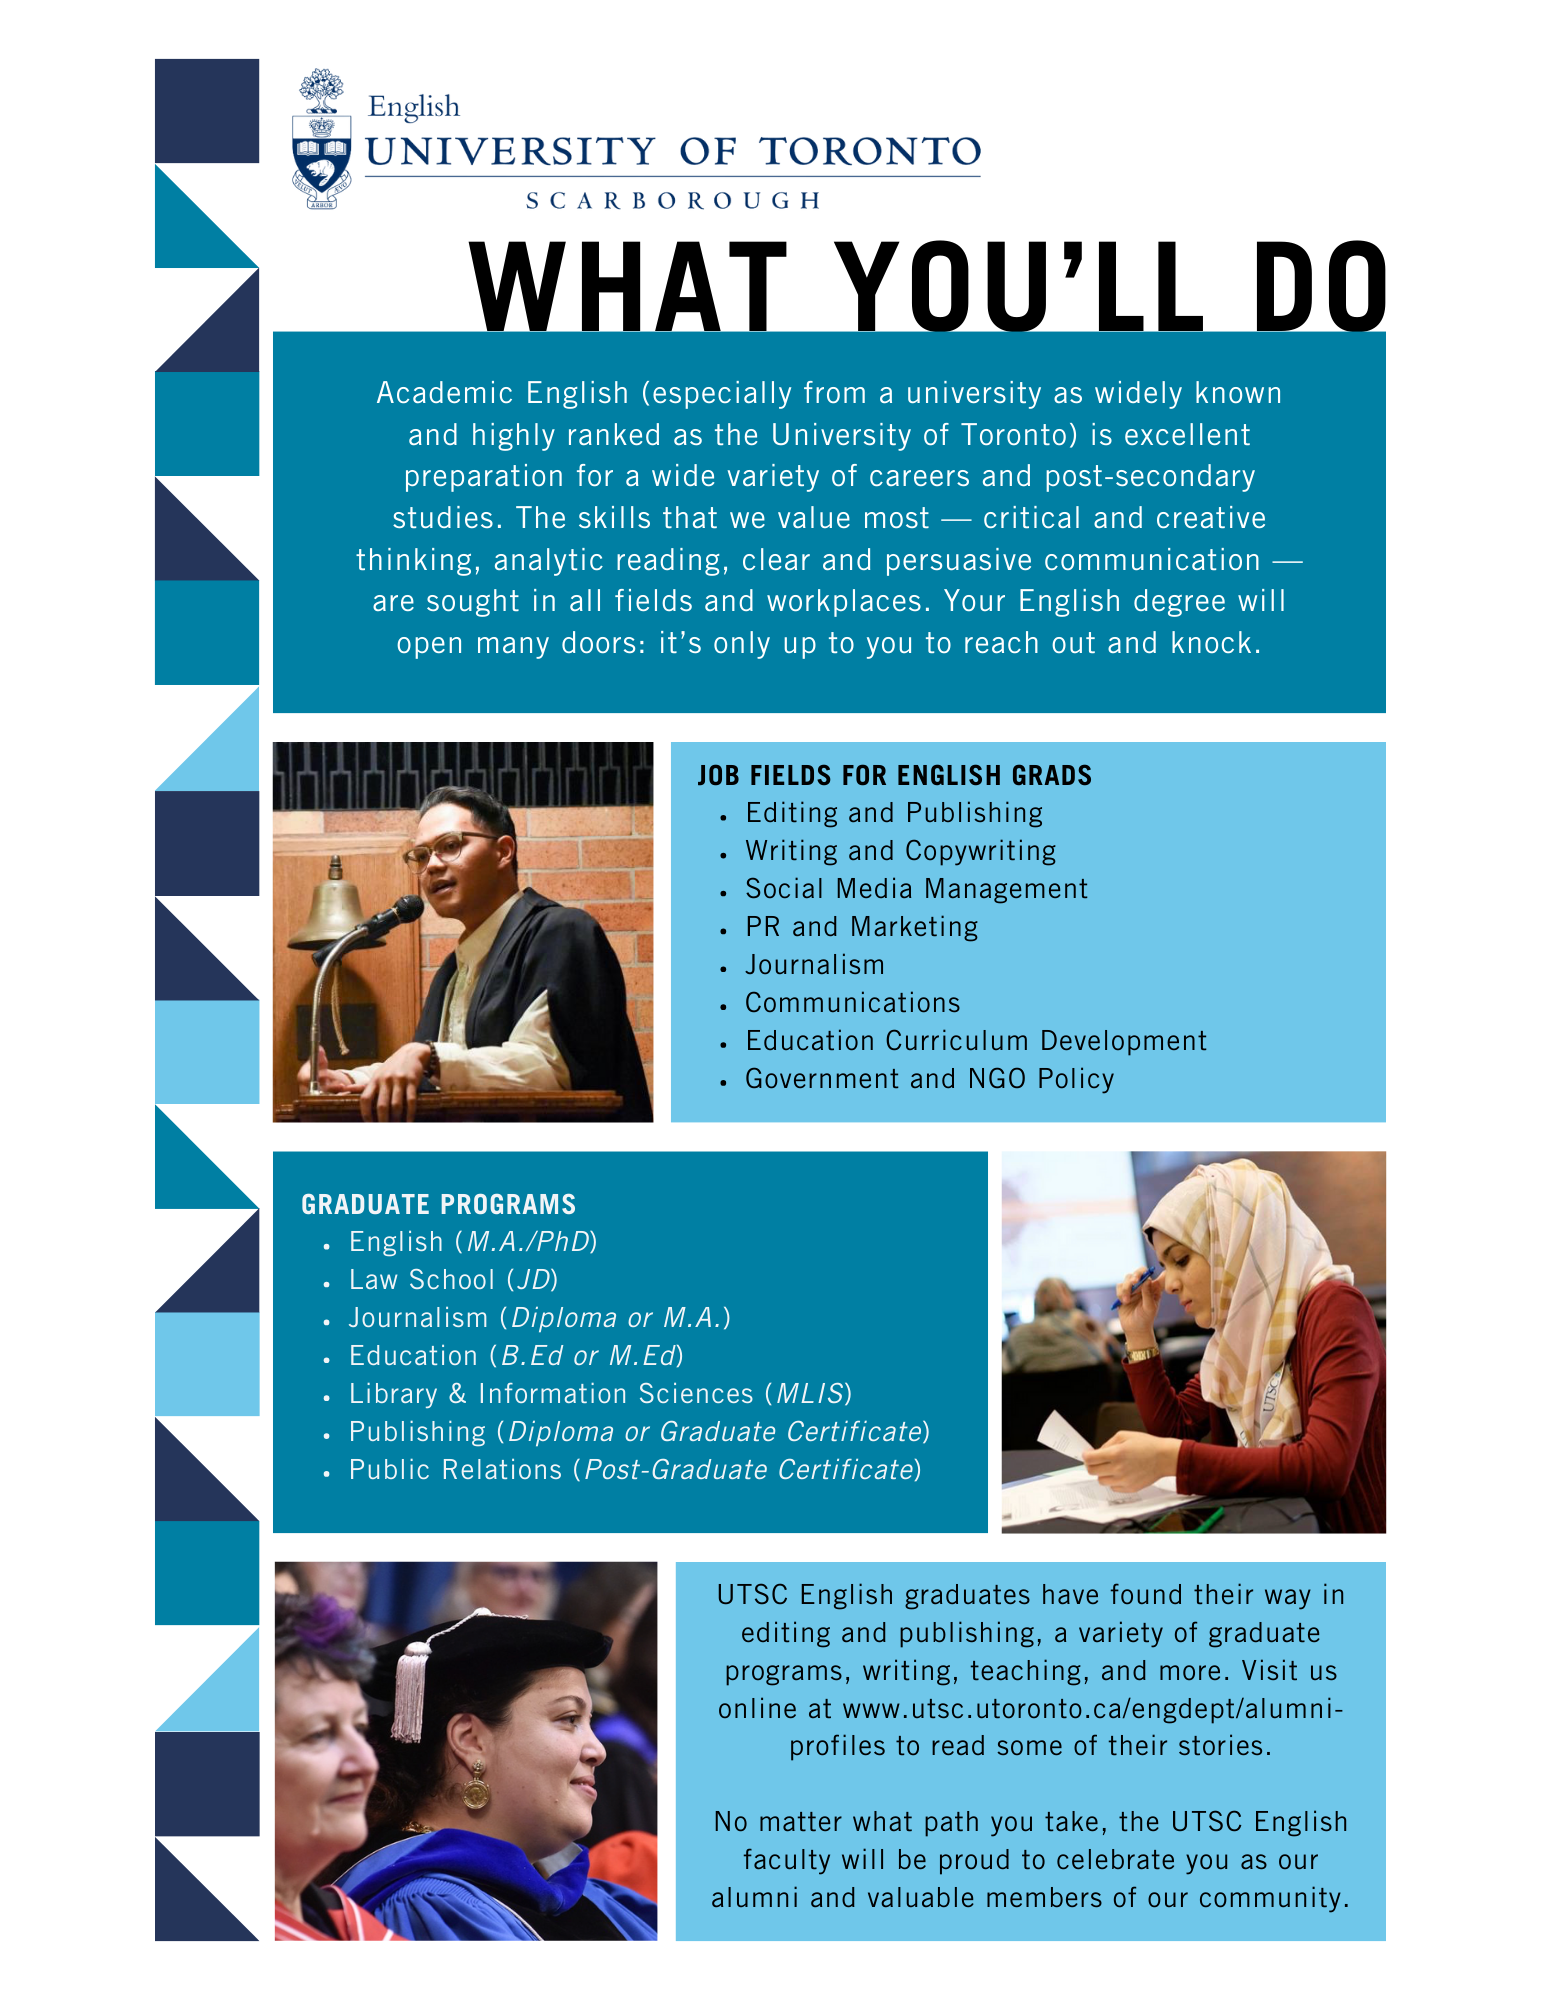 Poster titled "What You'll Do". Jobs for English graduates include: editing and publishing, copywriting, marketing, communications. Graduate school options include Masters in English, Law, Education, Library Sciences. Diplomas in Journalism, certificates in publishing and PR. 